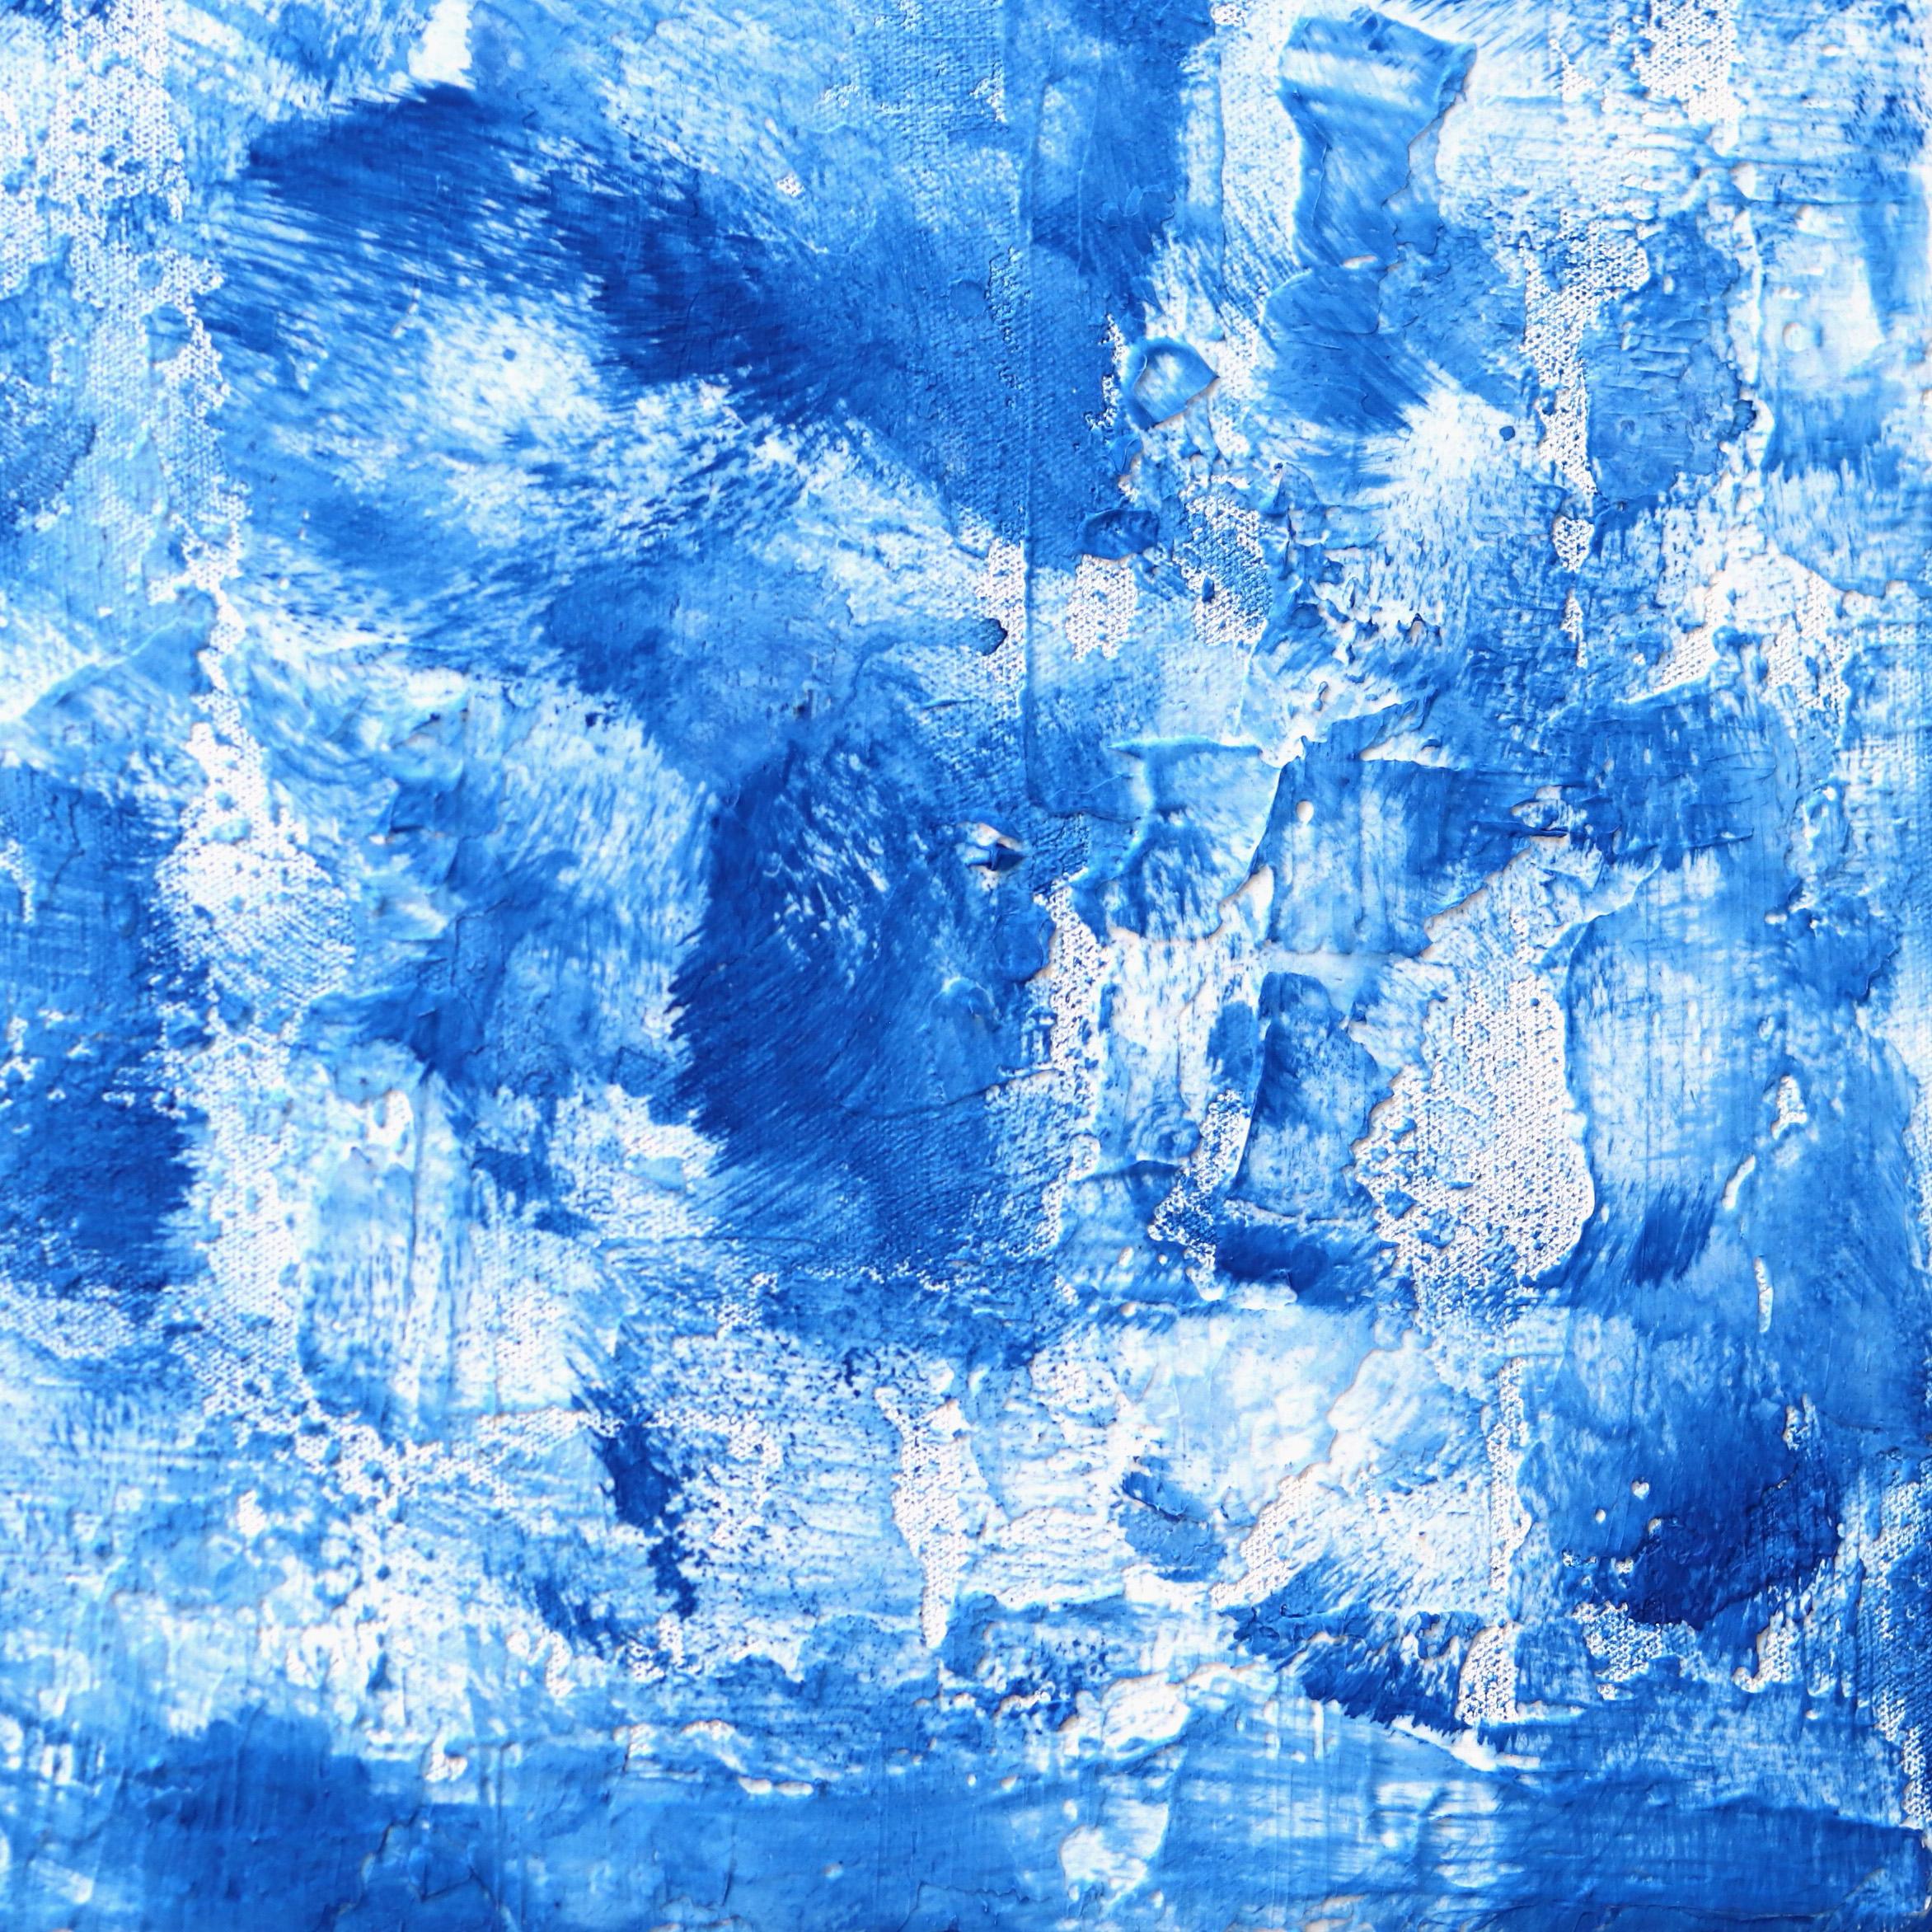 Fields of Blue - Large Textured Blue and White Abstract Painting For Sale 2